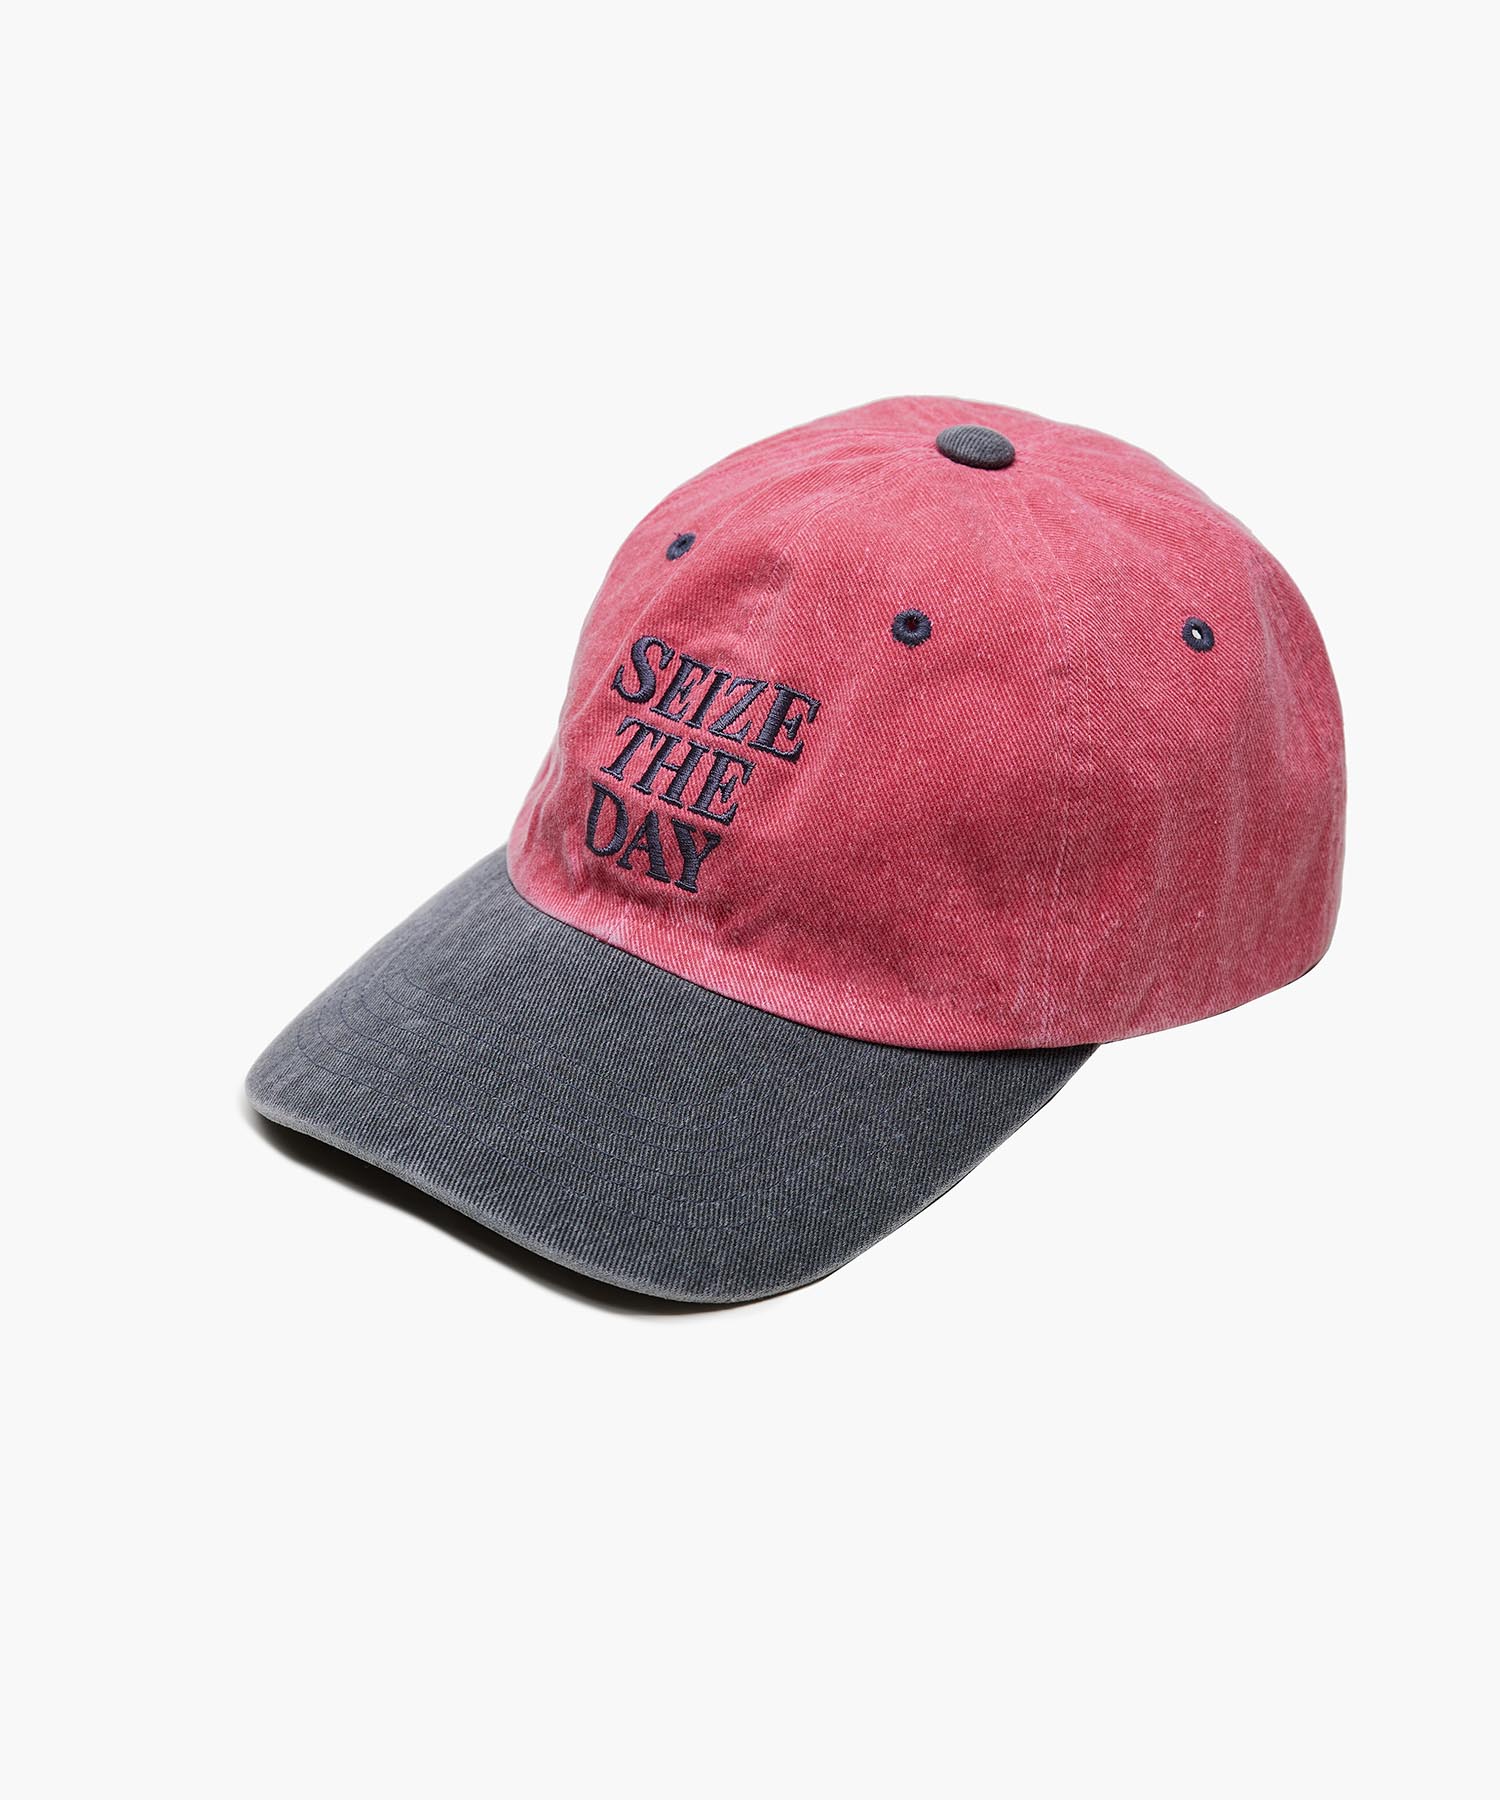 VINTAGE COTTON BALL CAP(SEIZE THE DAY)_PINK/CHARCOAL